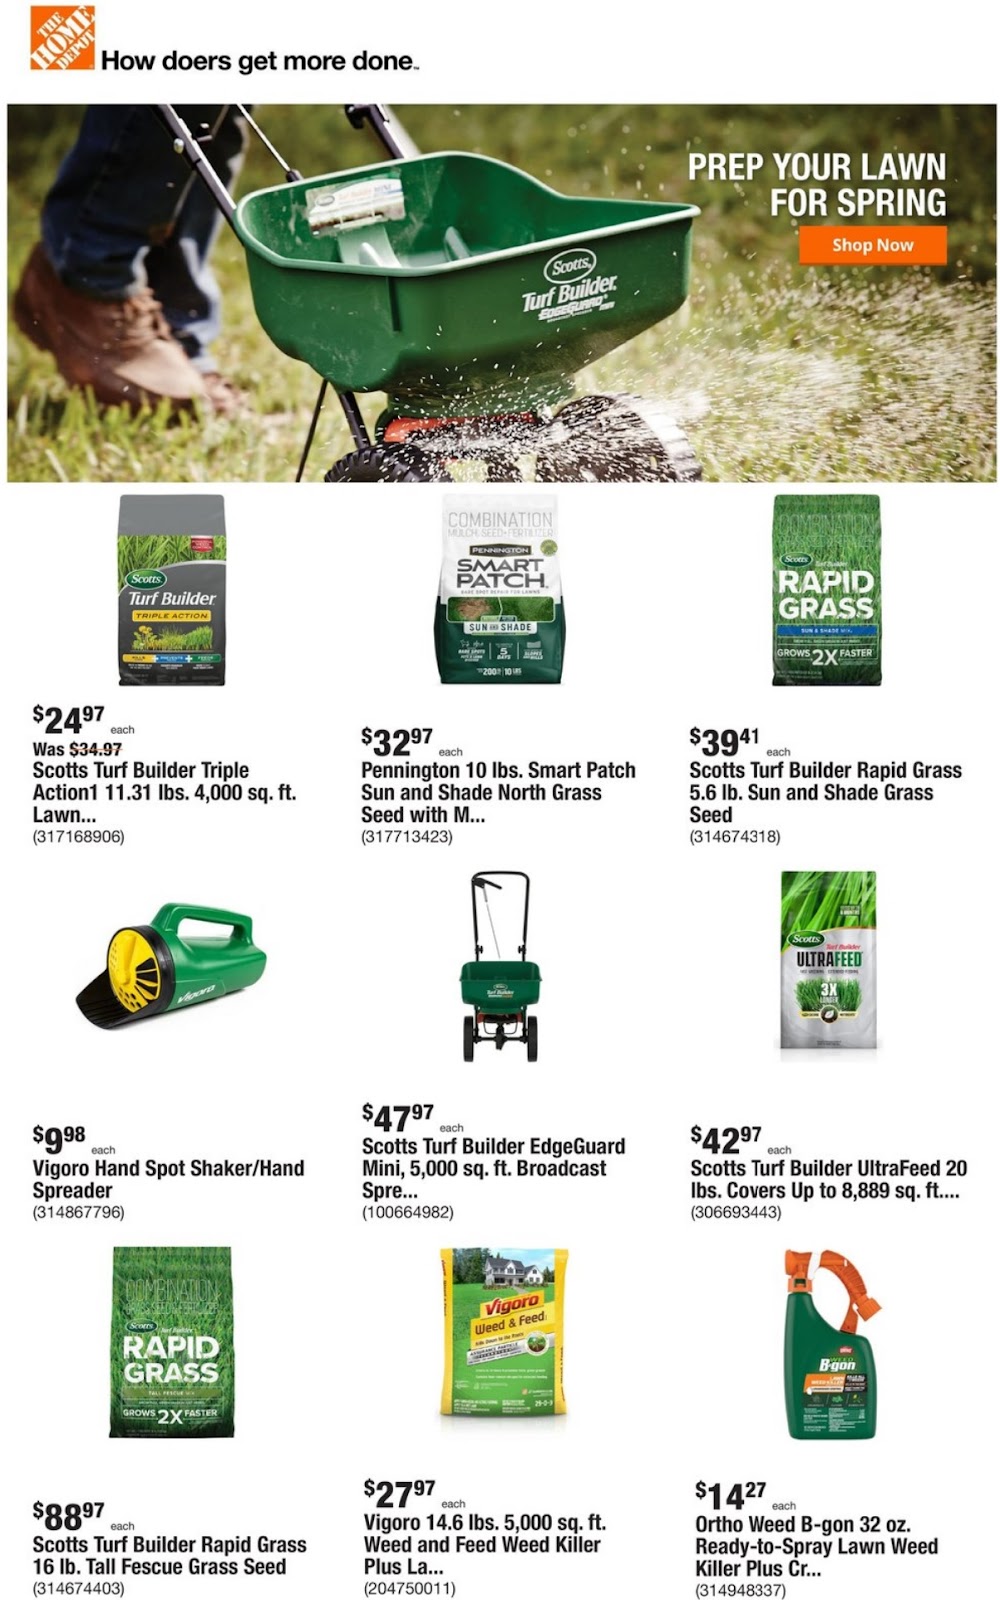 Home Depot Weekly Ad